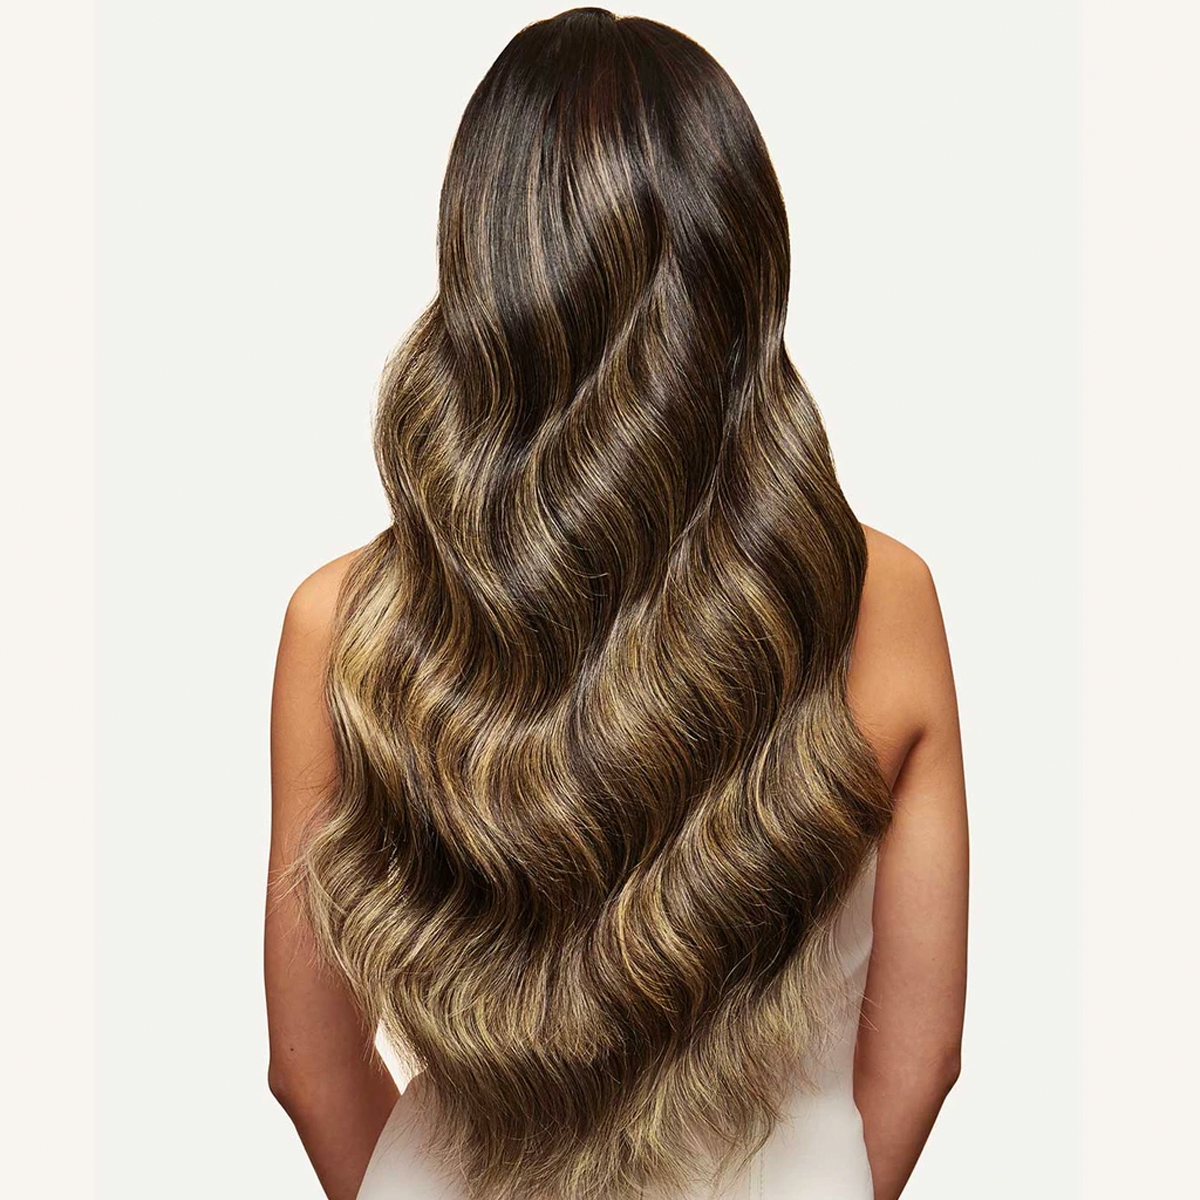 The 13 Best Hair Extensions and How to Take Care of Them | Who What Wear UK